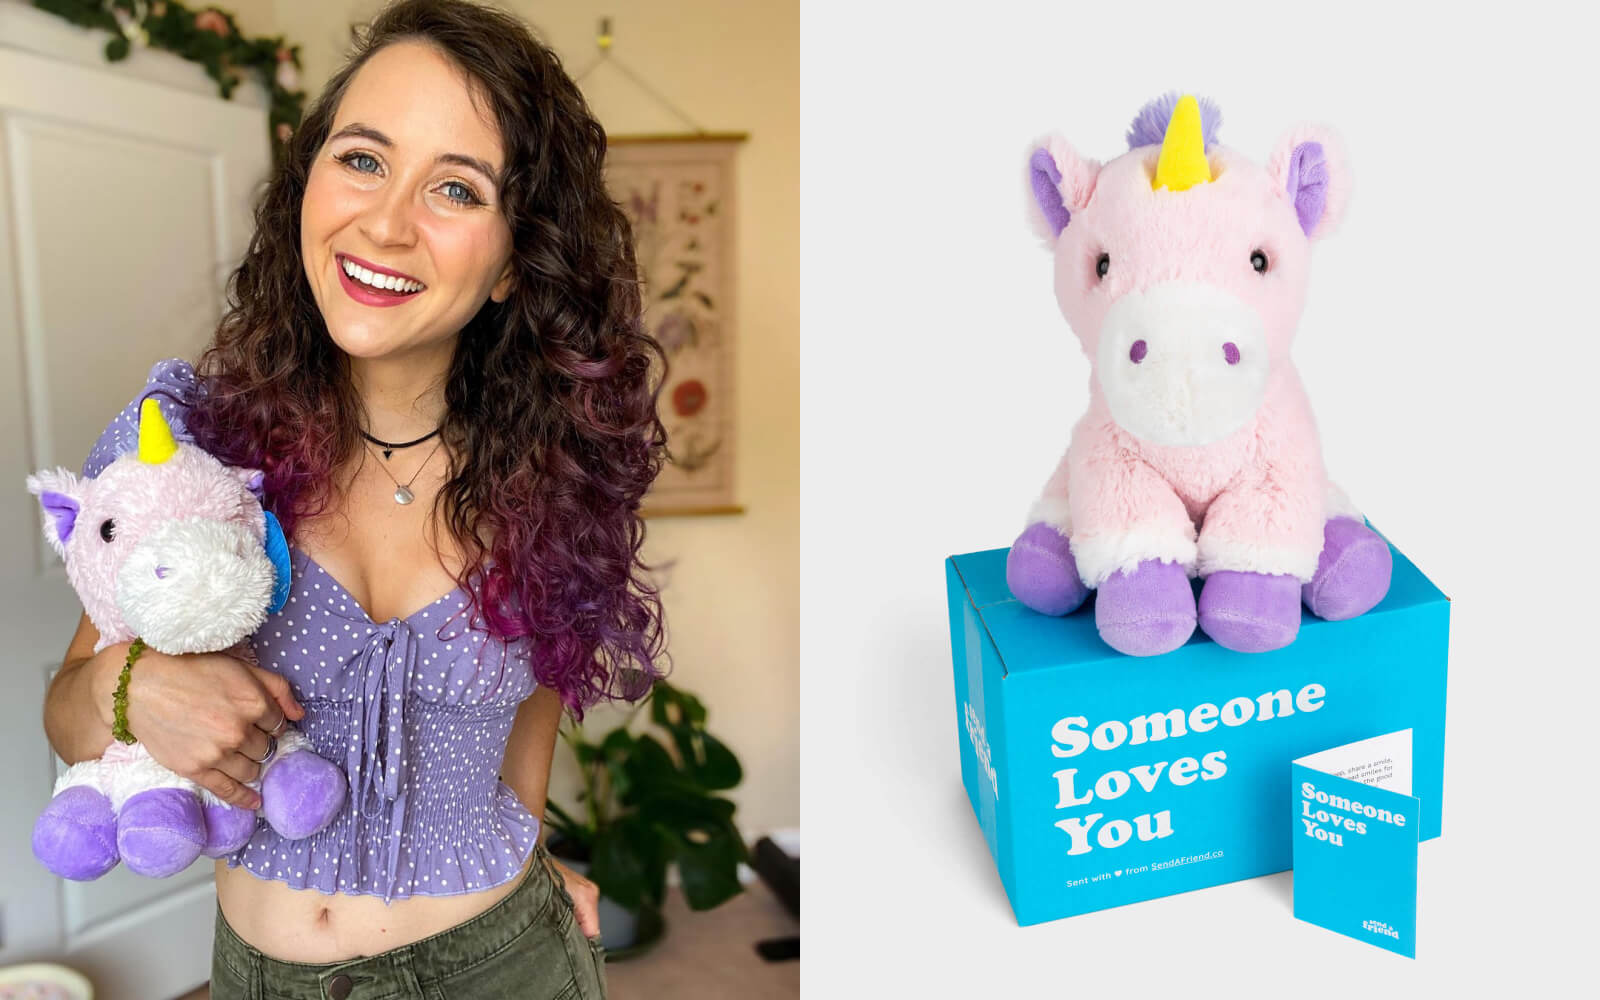 10 Magical Unicorn Gifts for Adults to Make Them Smile – SendAFriend